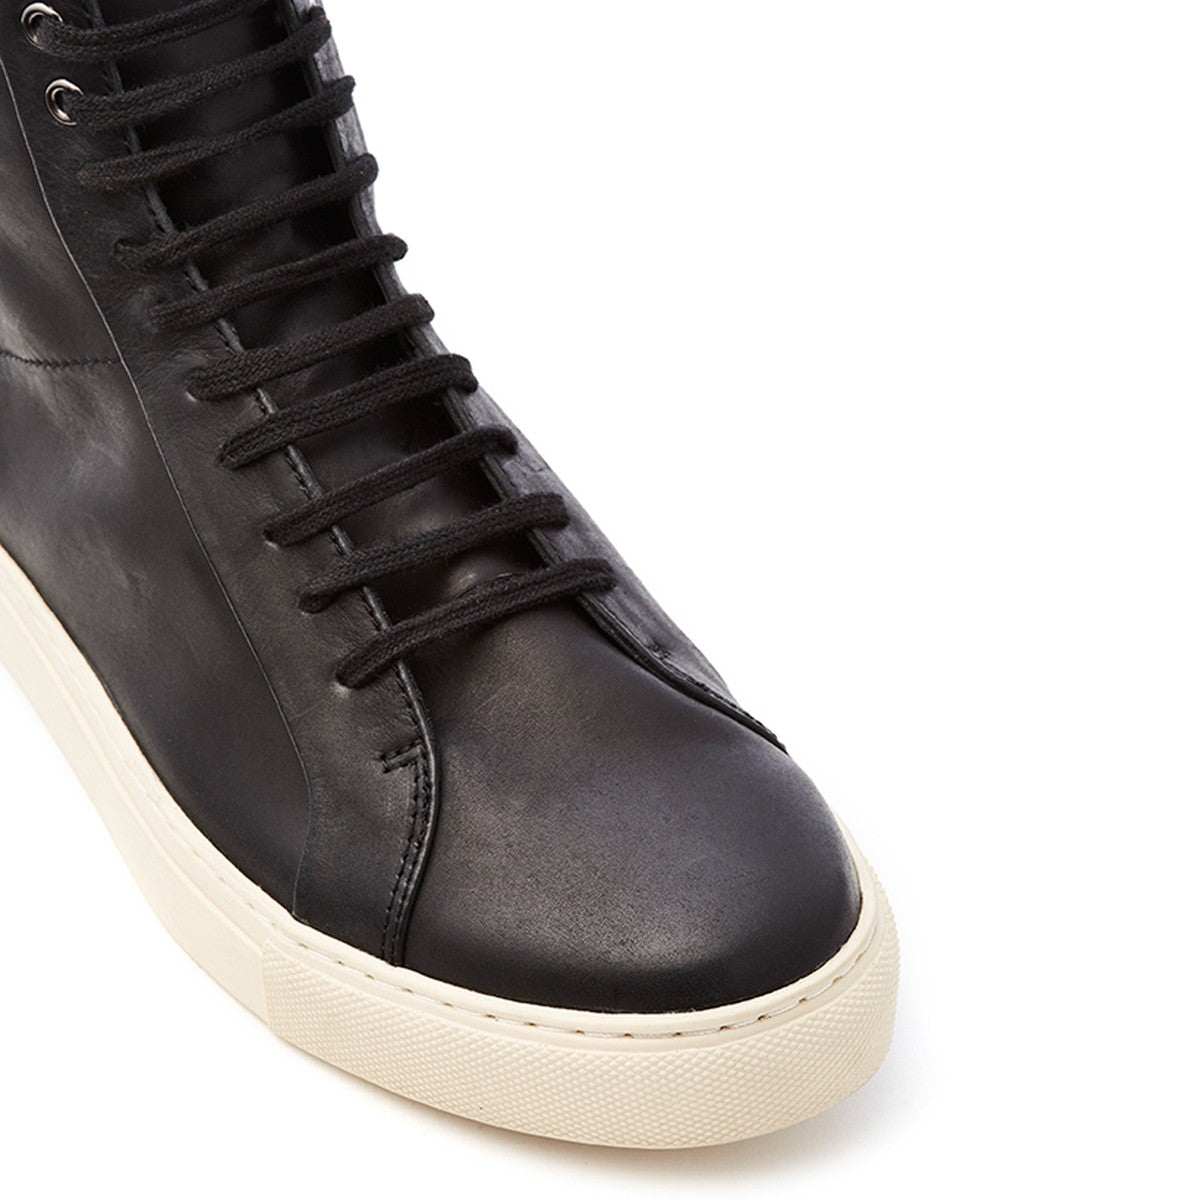 Mens black leather lace-up hi-top sneaker